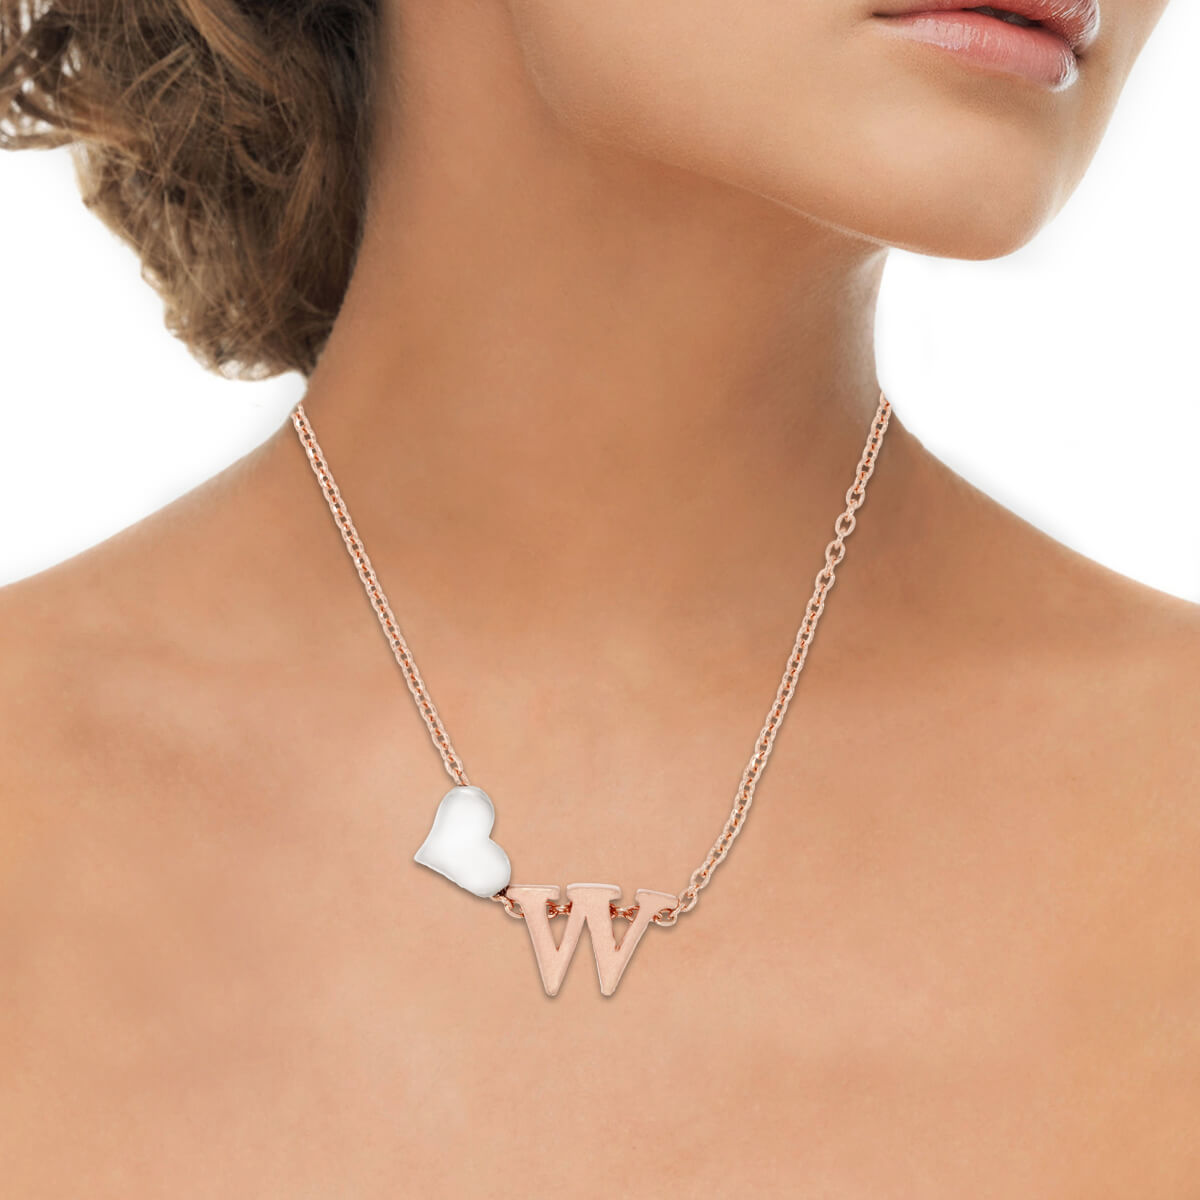 Sterling Silver "W" Initial Necklace